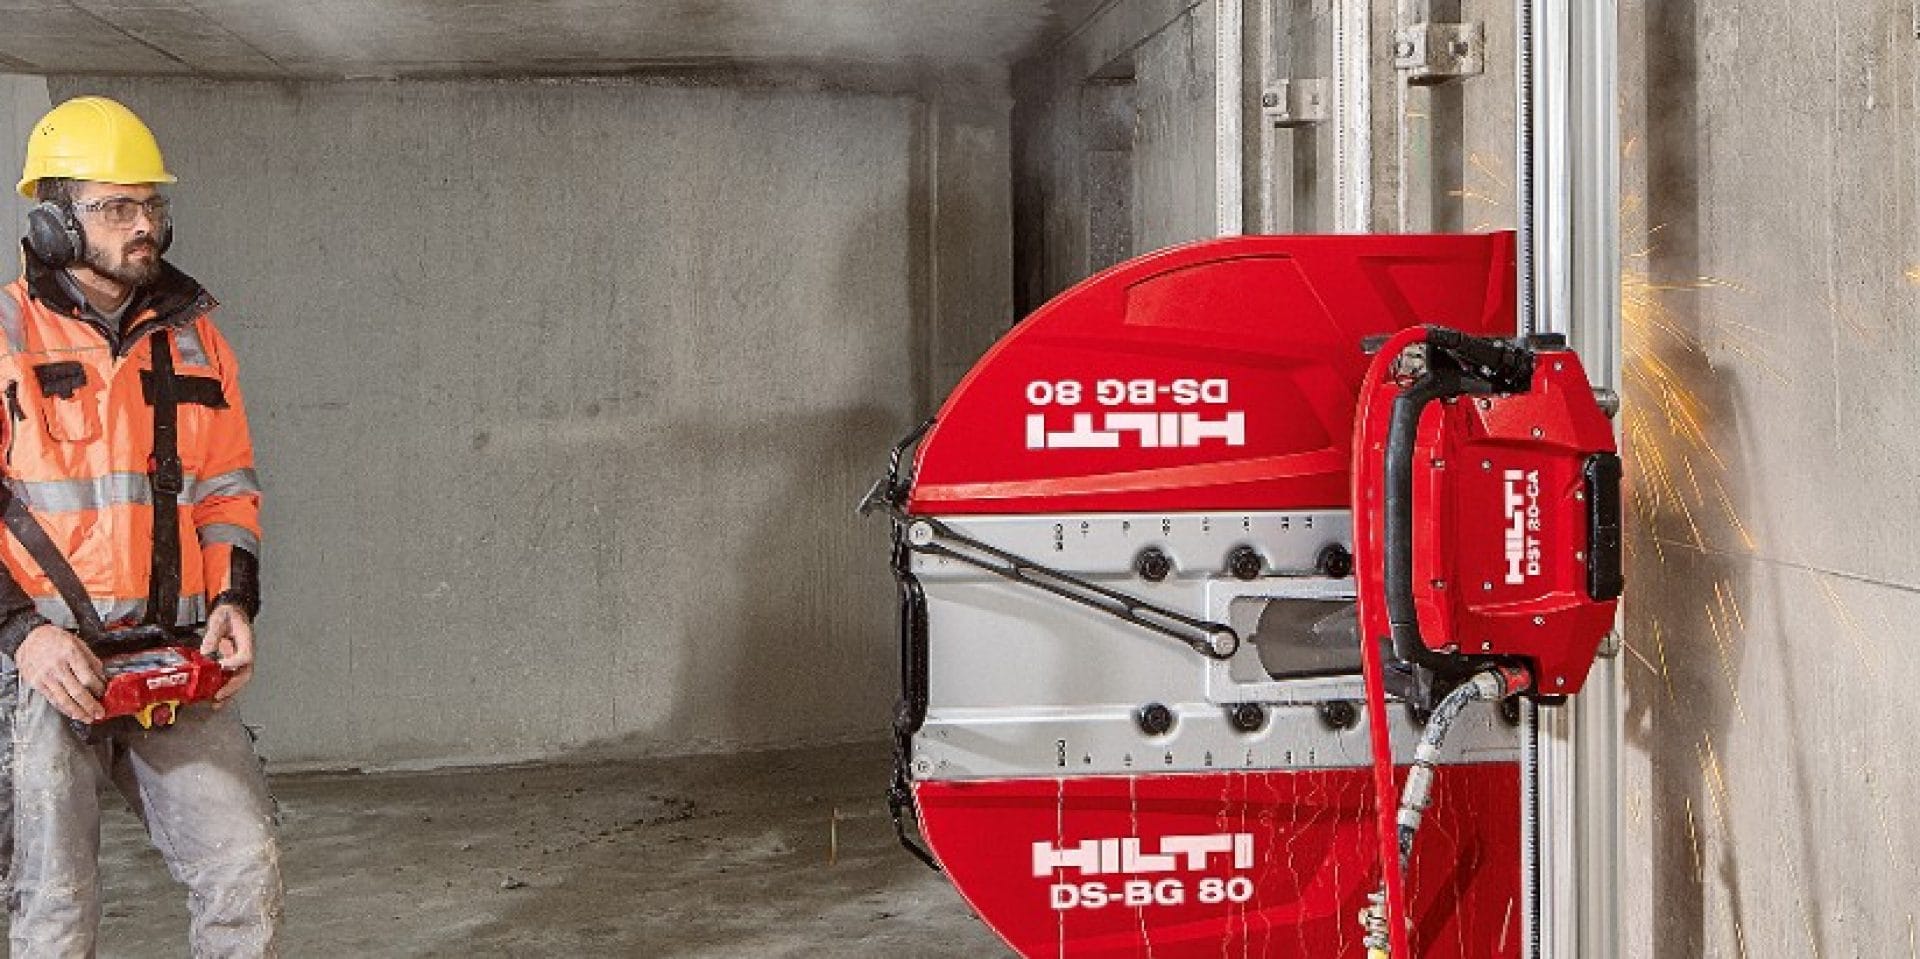 Hilti Electric diamond wall saw has more cutting power and starting torque